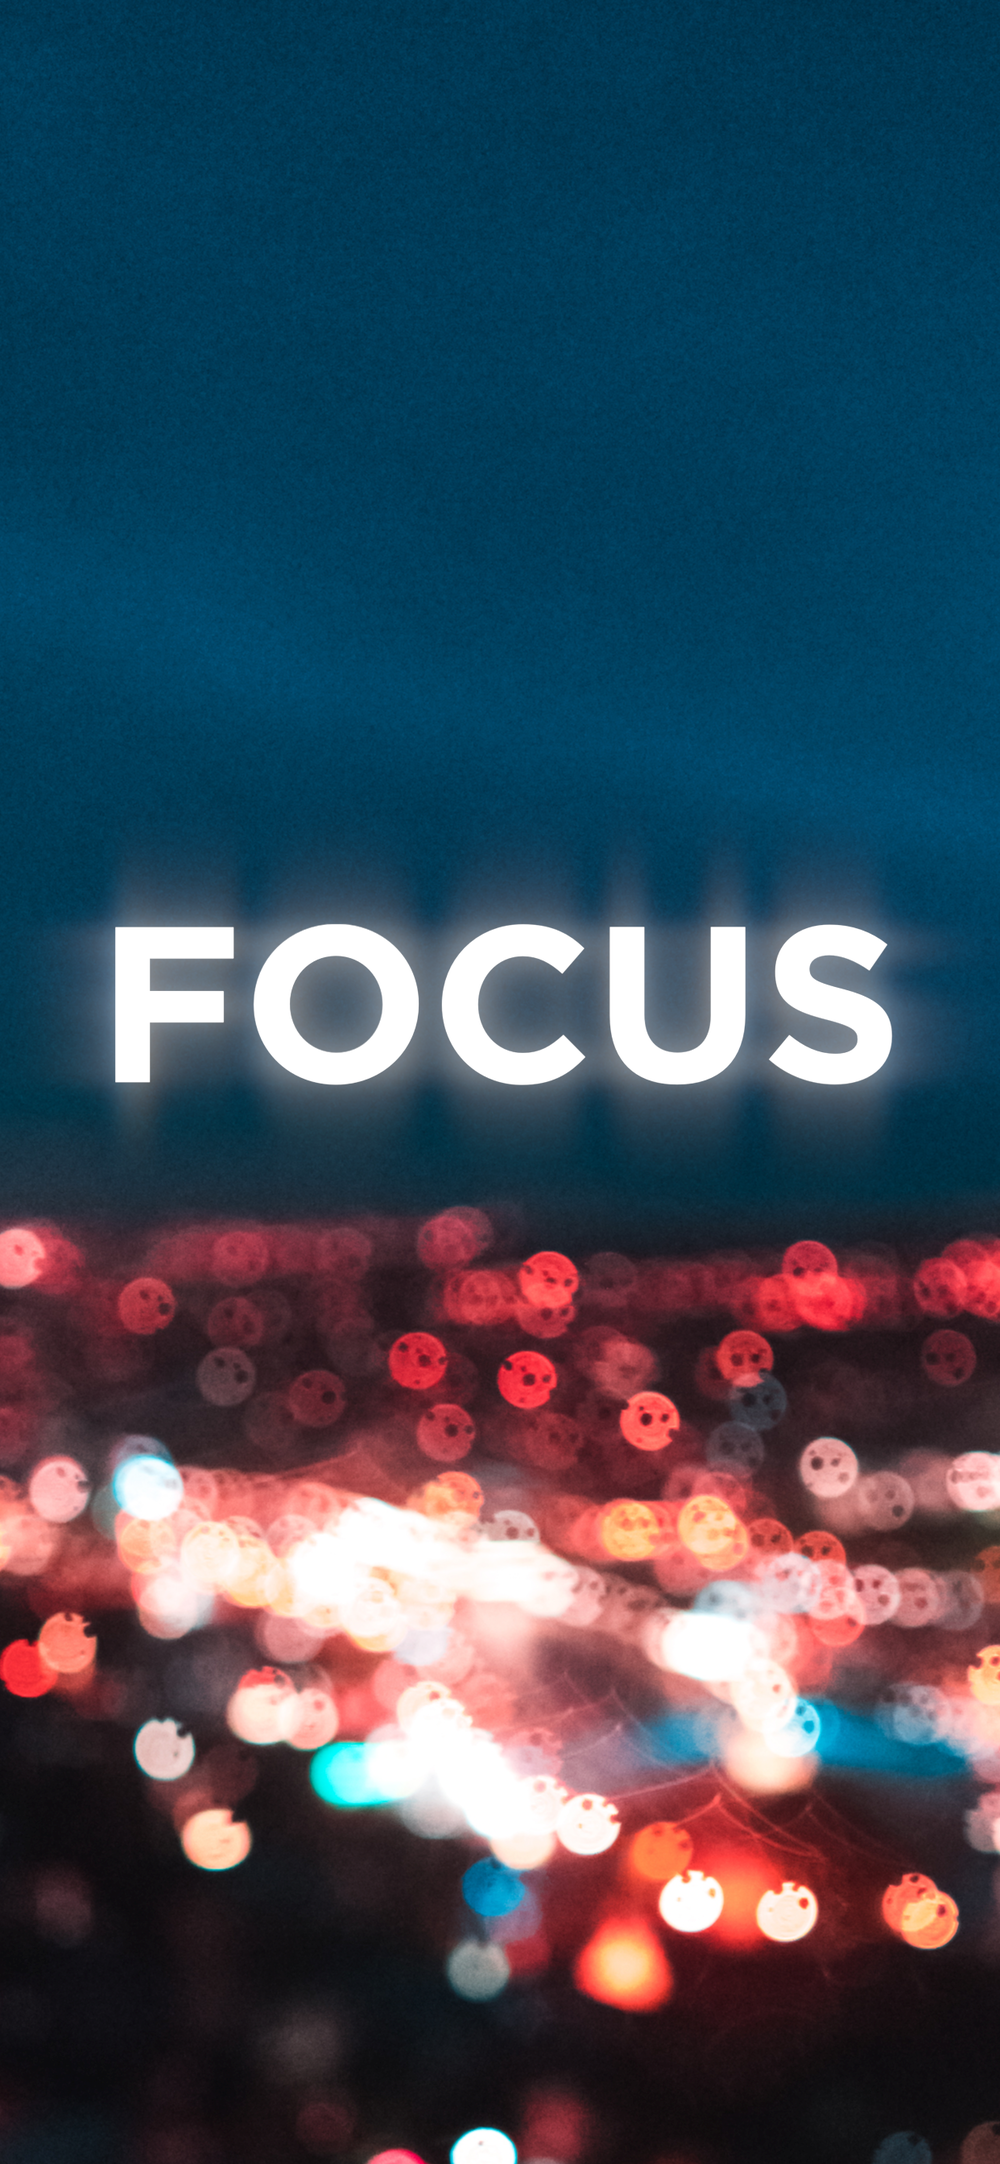 Focus motivational quote on night starry sky background Stock Photo  Alamy